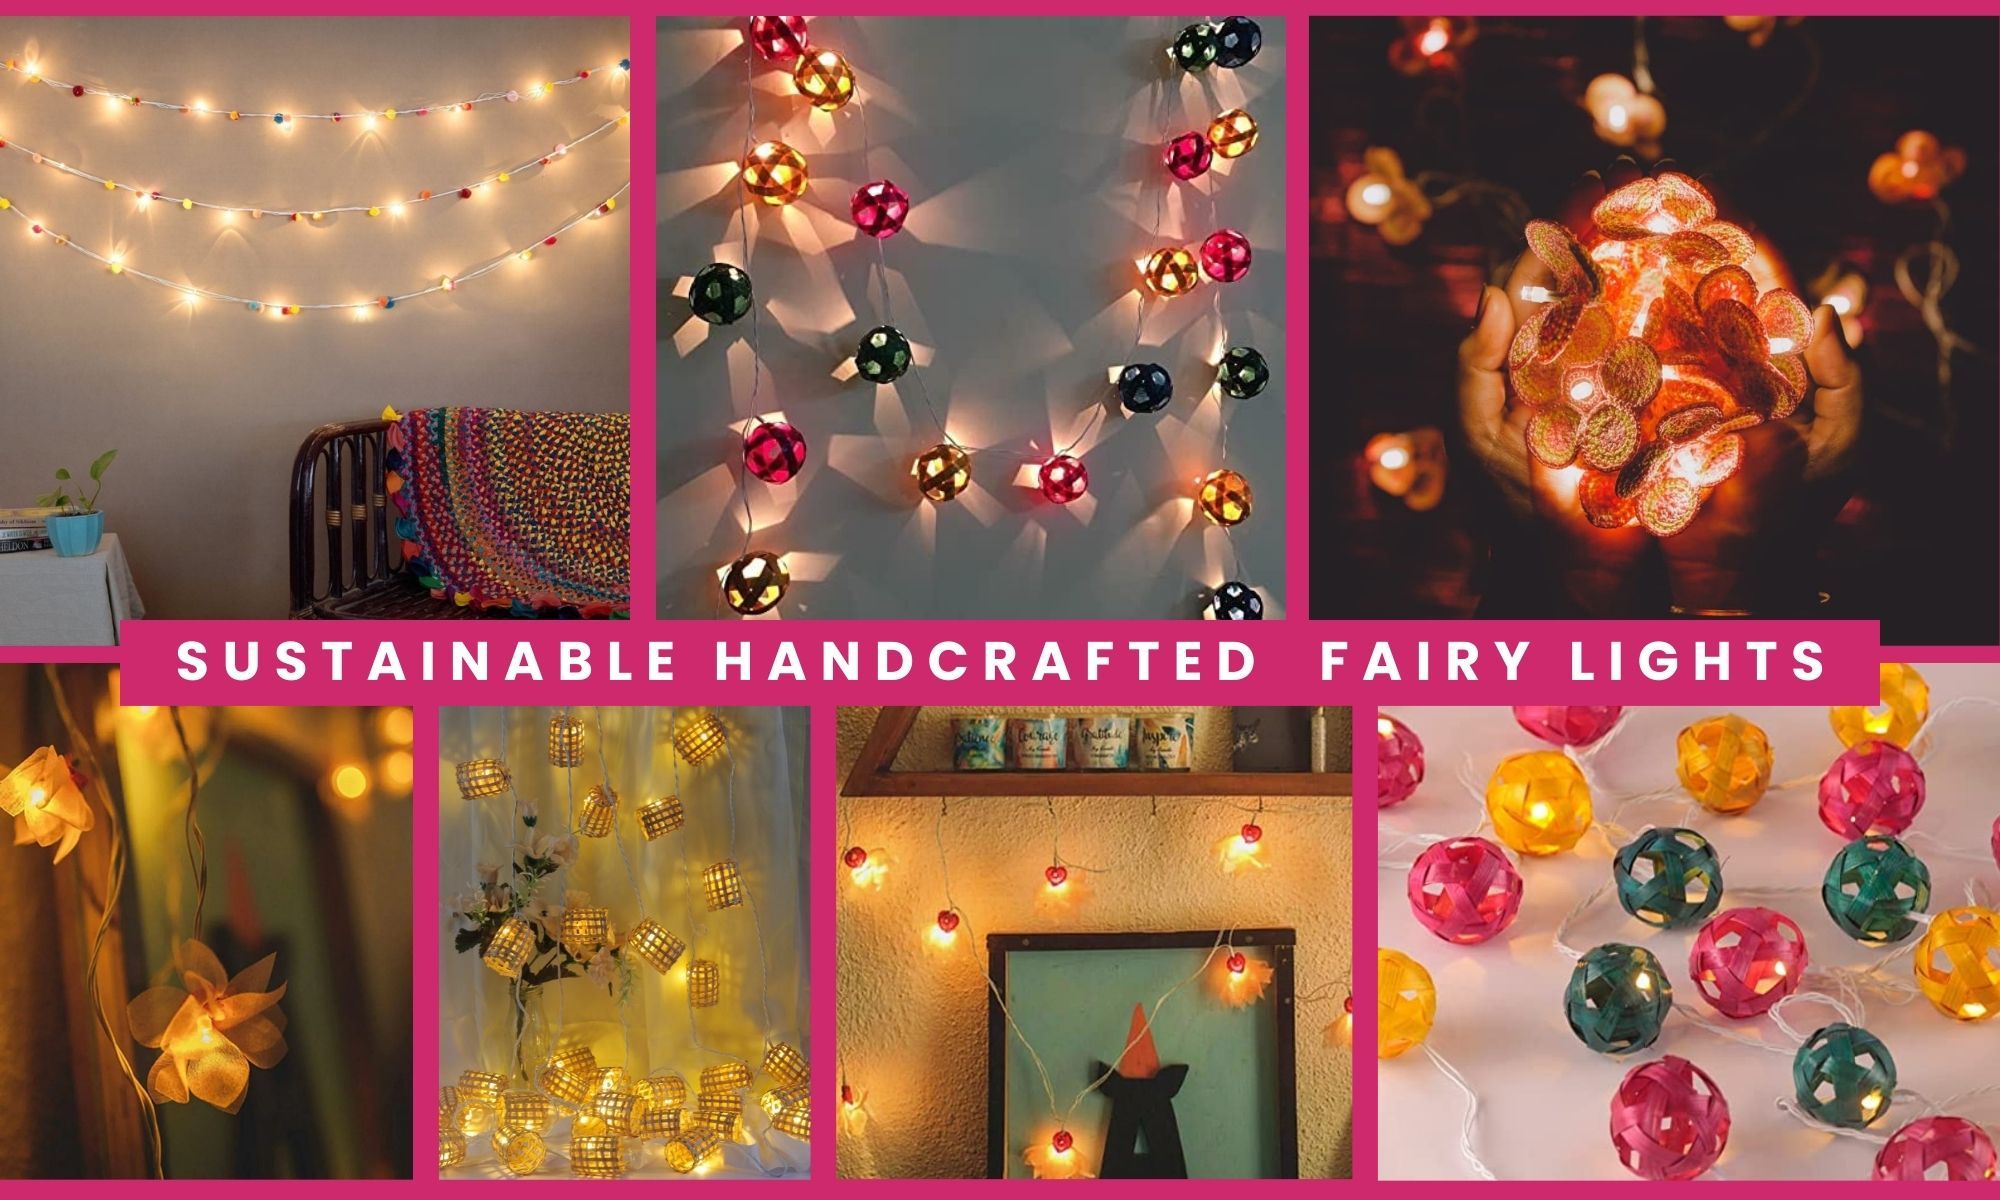 Shining Bright: Handcrafted Sustainable Fairy Lights for a Green Diwali